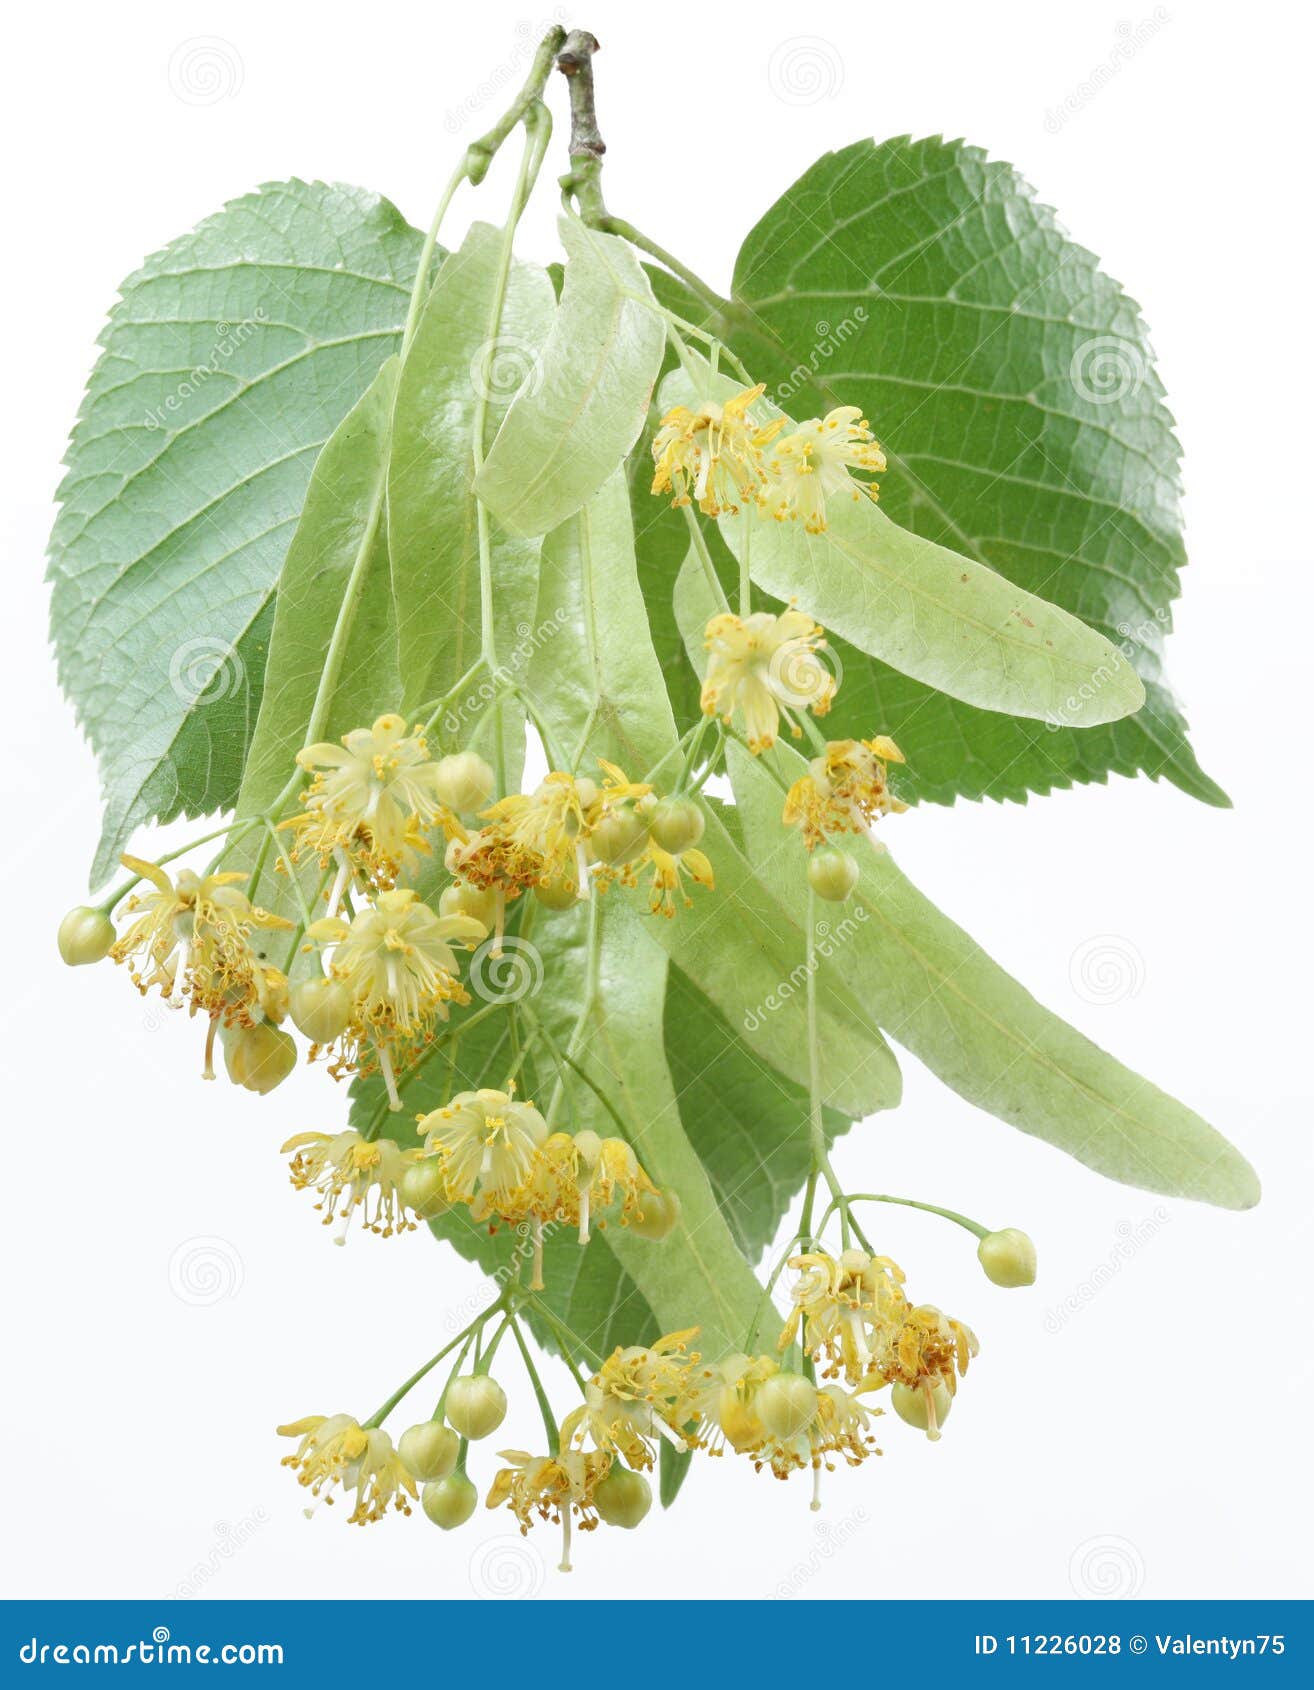 Flowers of linden-tree stock photo. Image of fresh, branch - 11226028